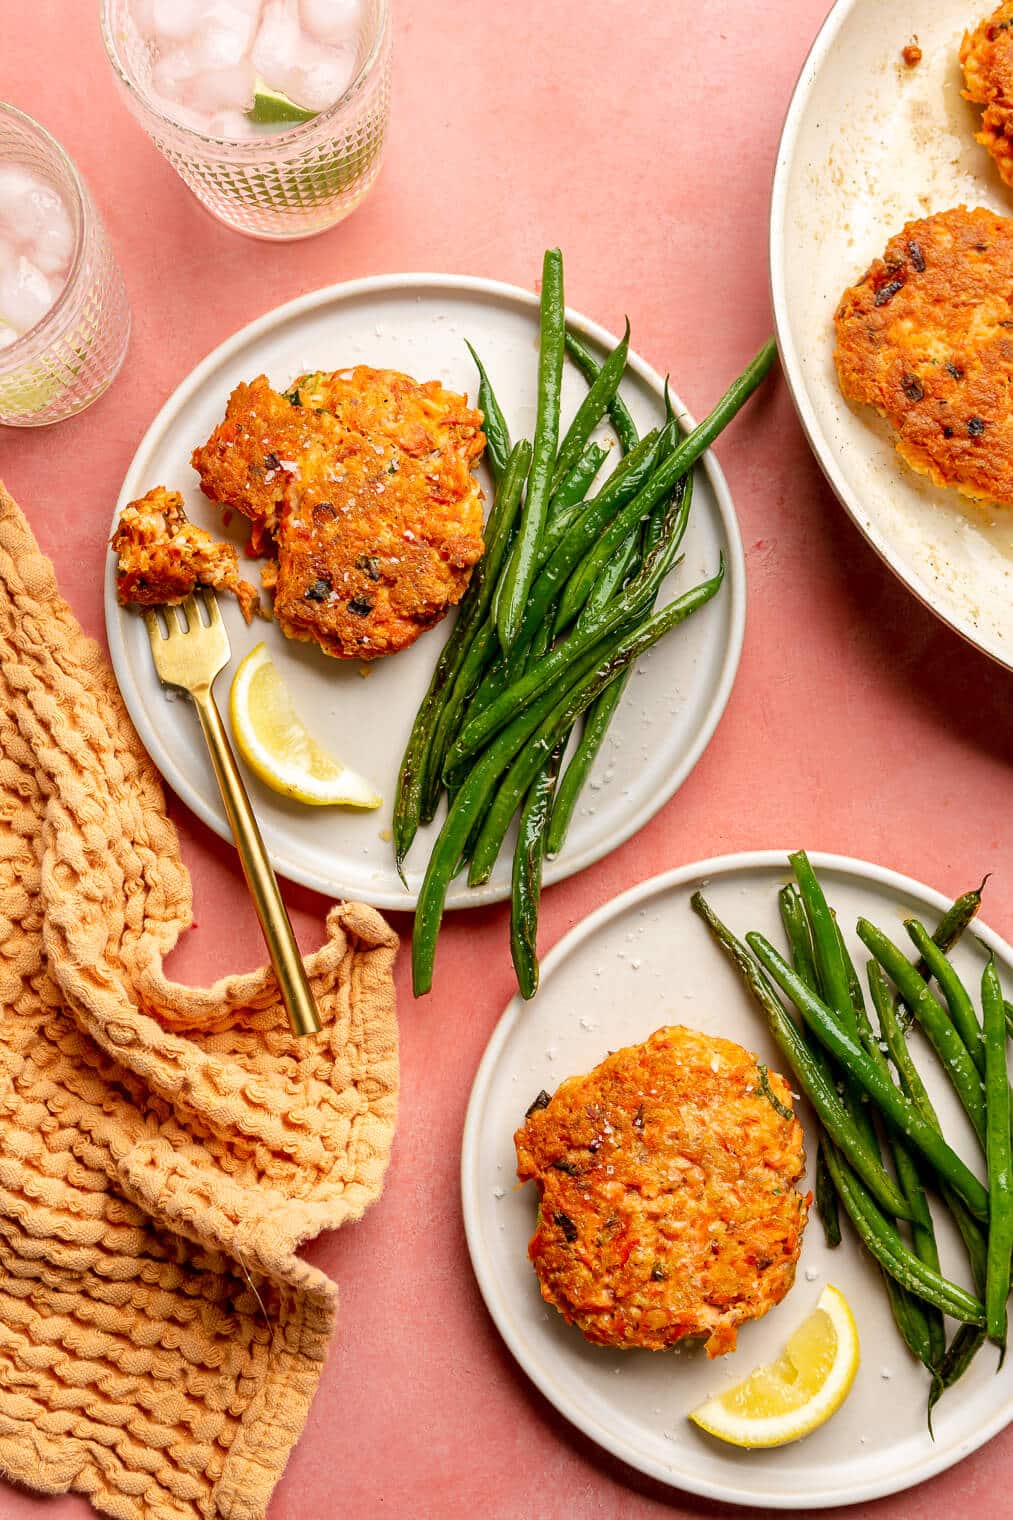 Two servings of salmon cakes and sauteed green beans on plates next to a skillet with more salmon cakes and two glasses of water.